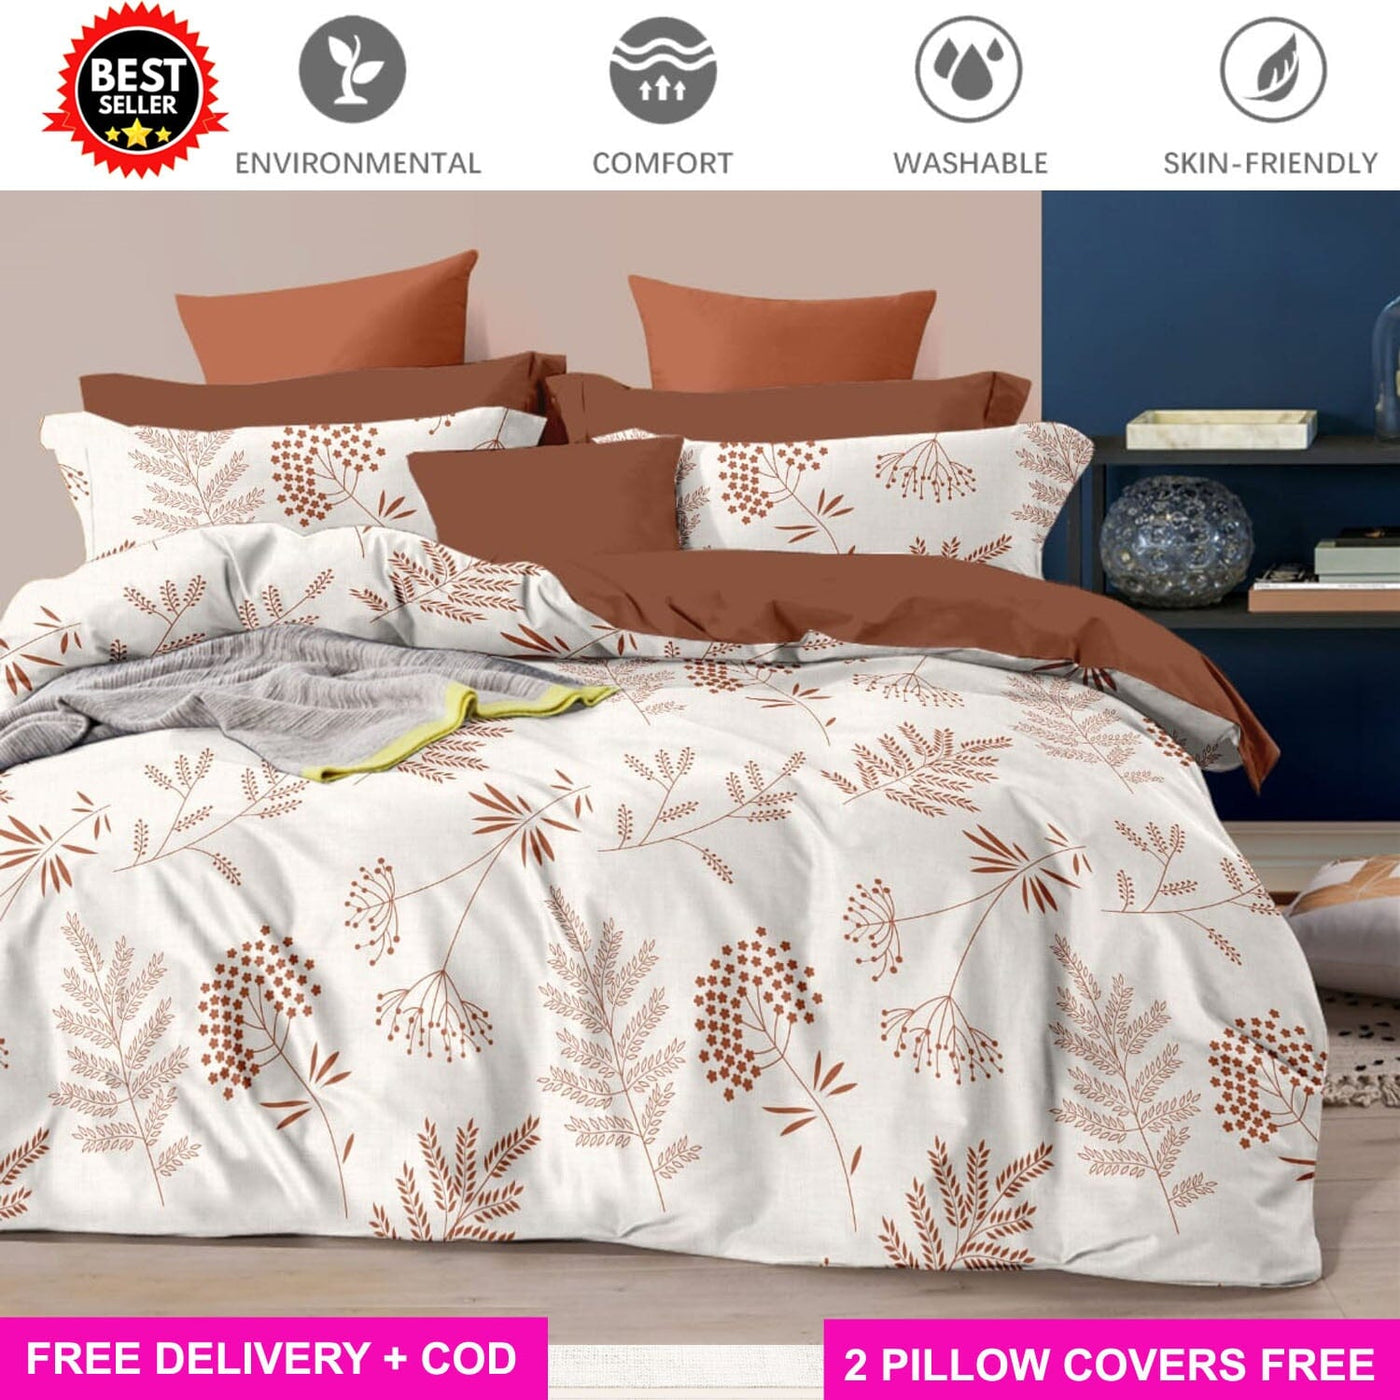 Cream Grain Full Elastic Fitted Bedsheet with 2 Pillow Covers - King Size Bed Sheets Great Happy IN 